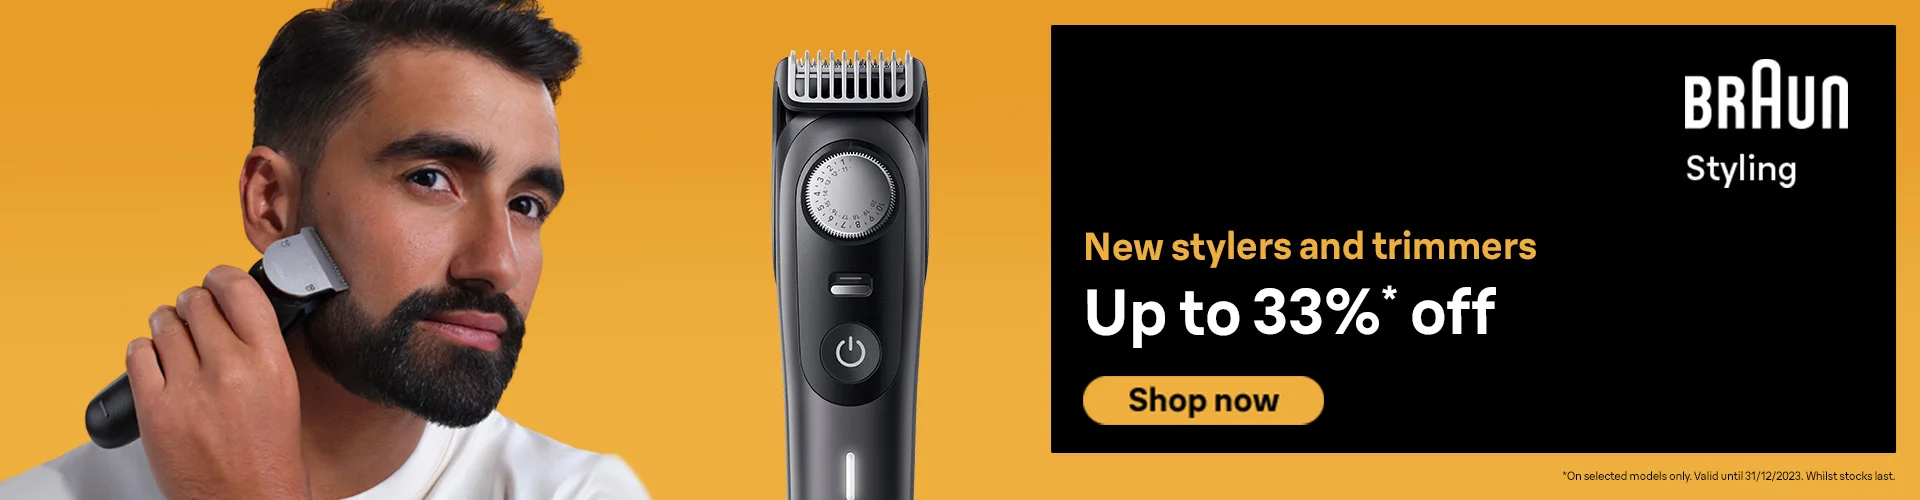 Sign Up And Get Special Offer At Braun UK